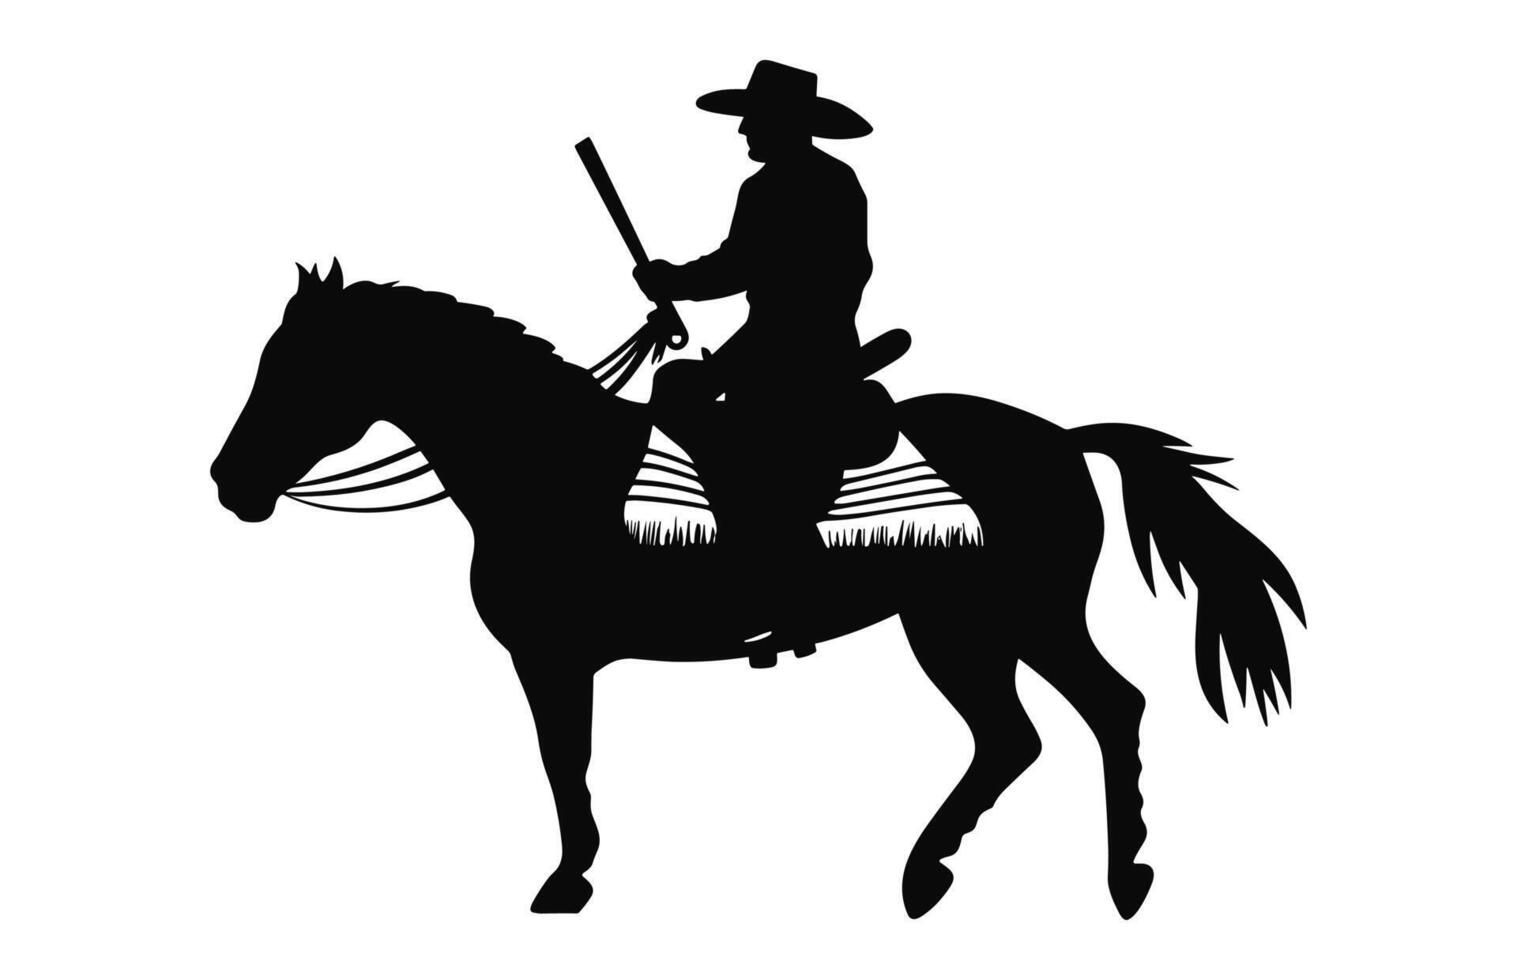 Mexican Cowboy Riding a Horse vector black silhouette isolated on a white background